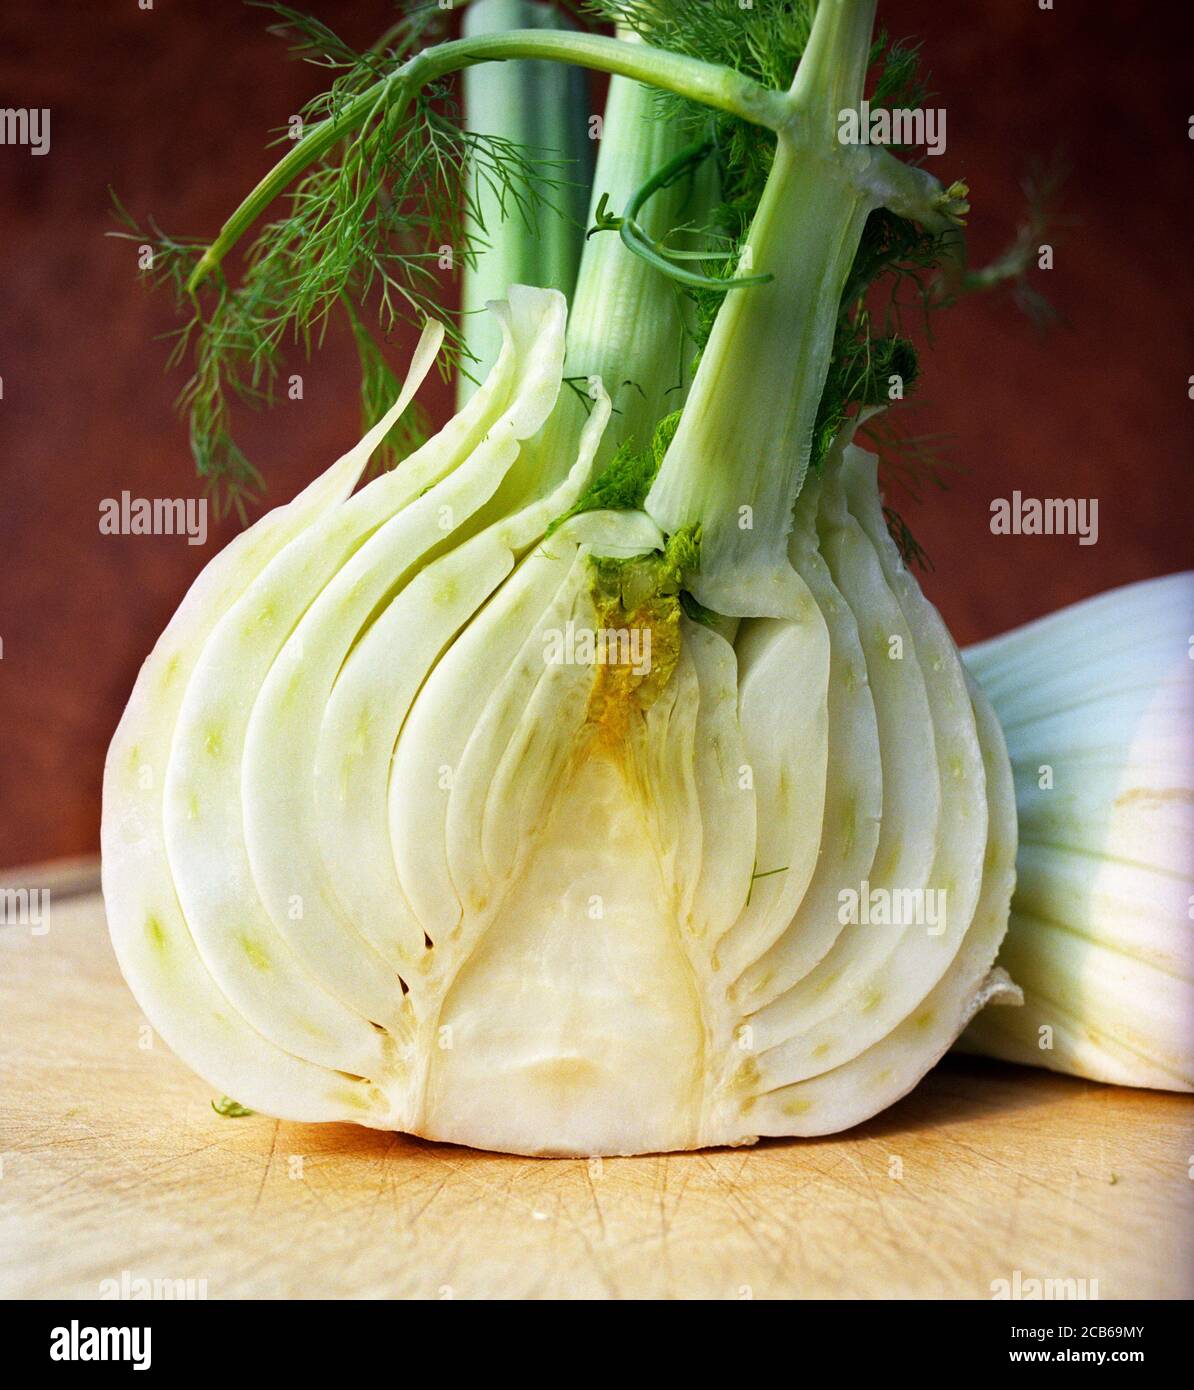 A fennel bulb cut open in close up Stock Photo